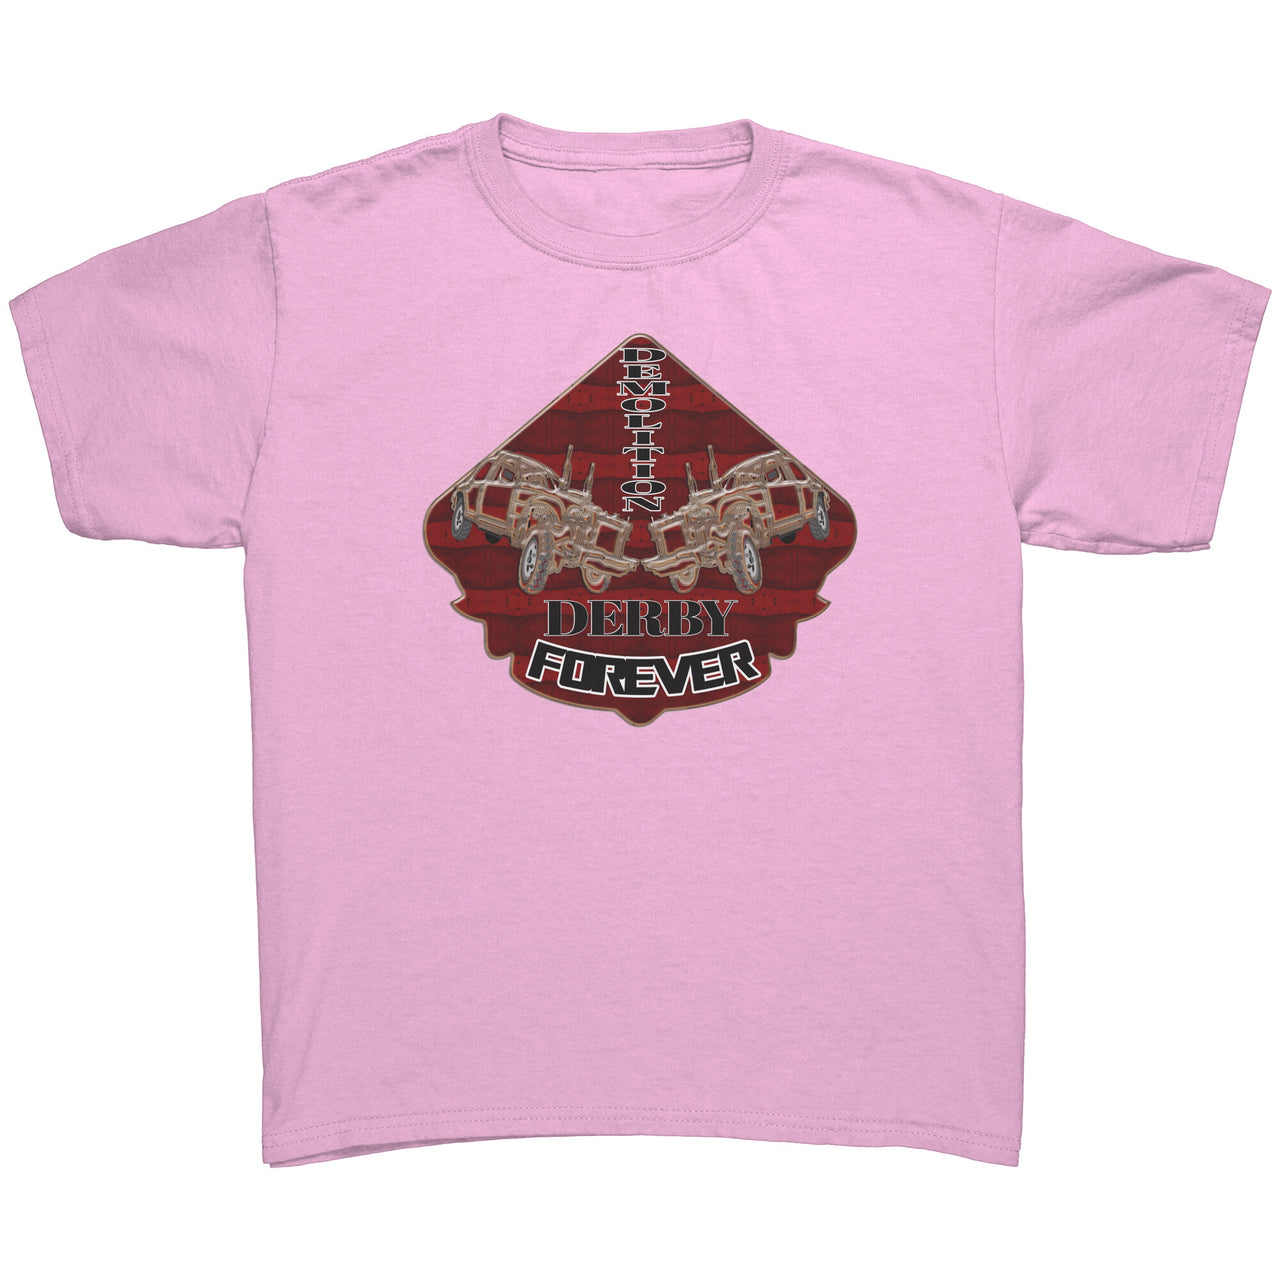 Demolition Derby Forever Youth T-shirts/Hoodies